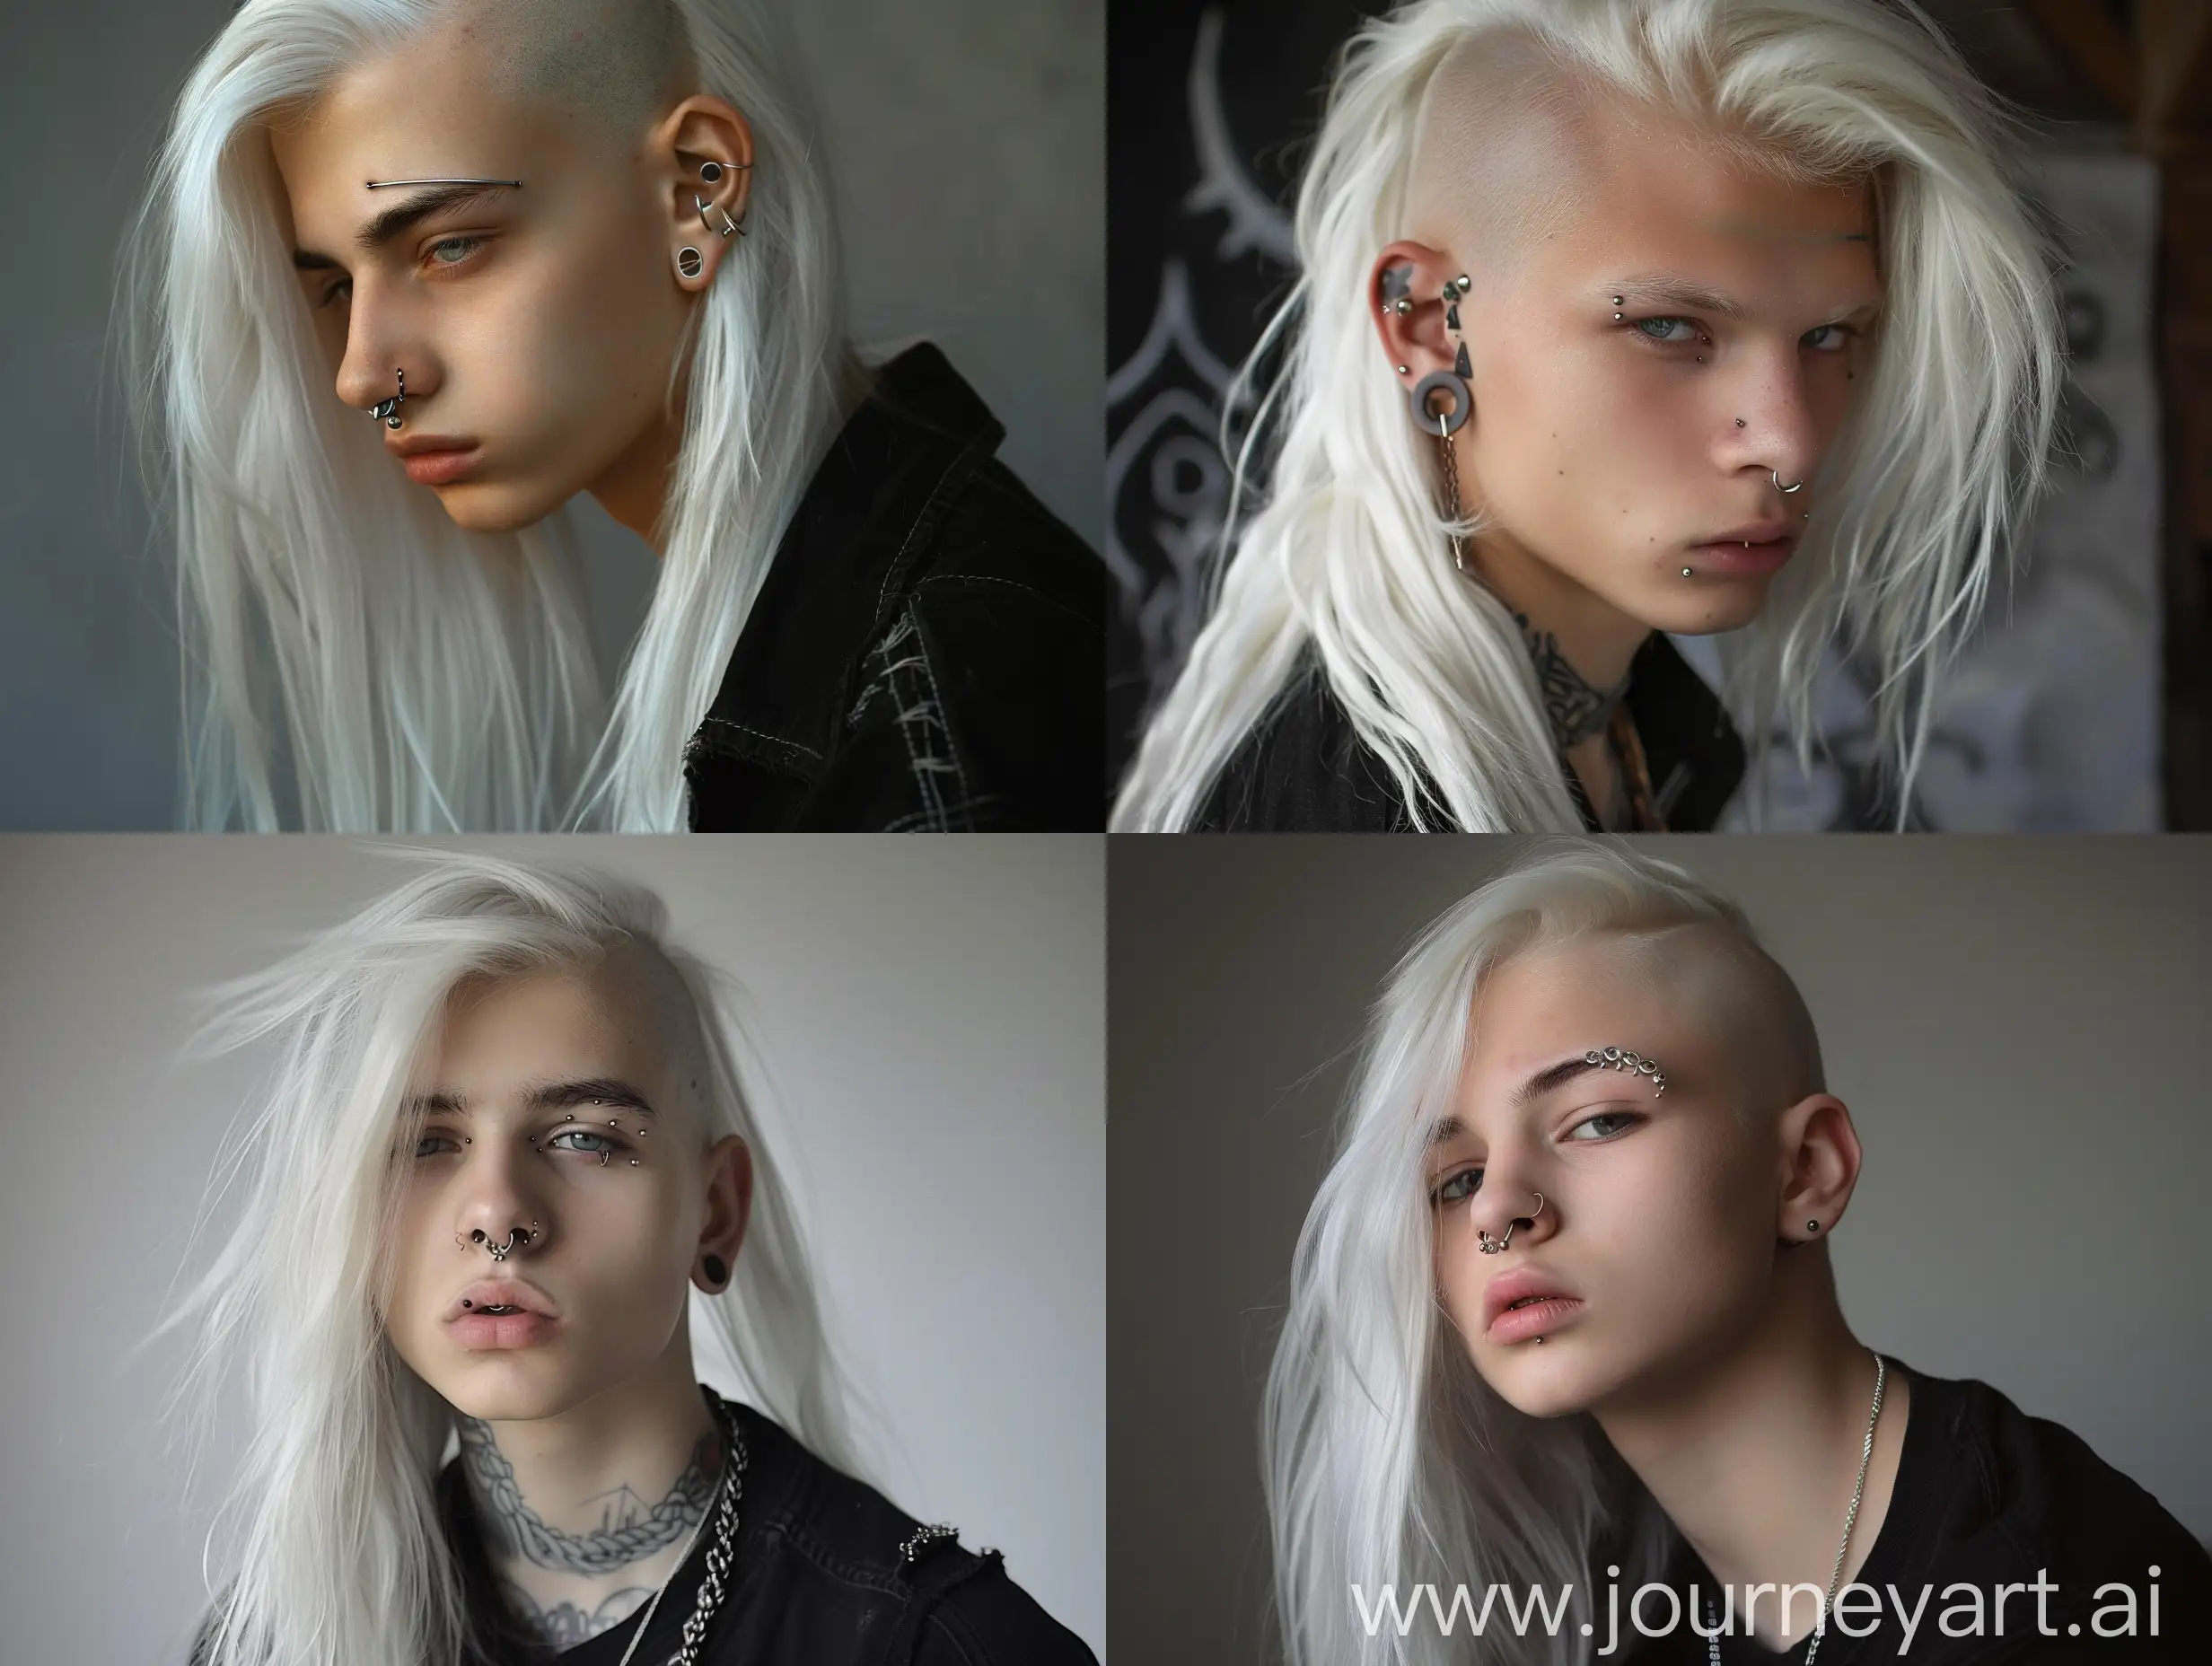 WhiteHaired-Teen-Boy-with-Piercings-in-Urban-Setting